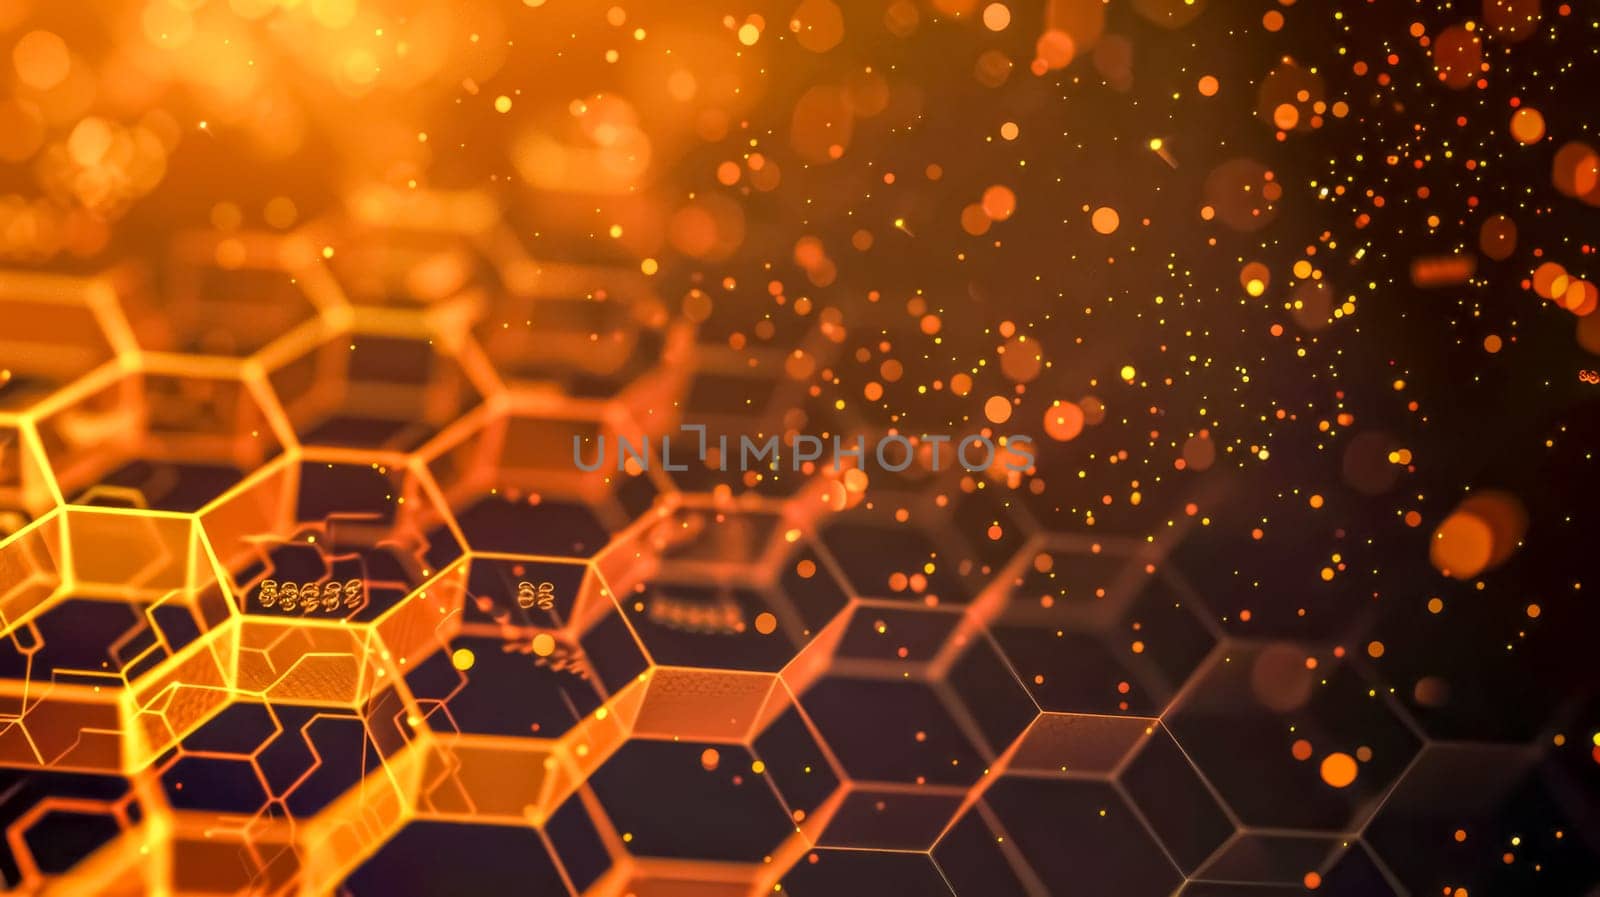 Dynamic orange and gold hexagonal pattern with glowing particles for a futuristic background